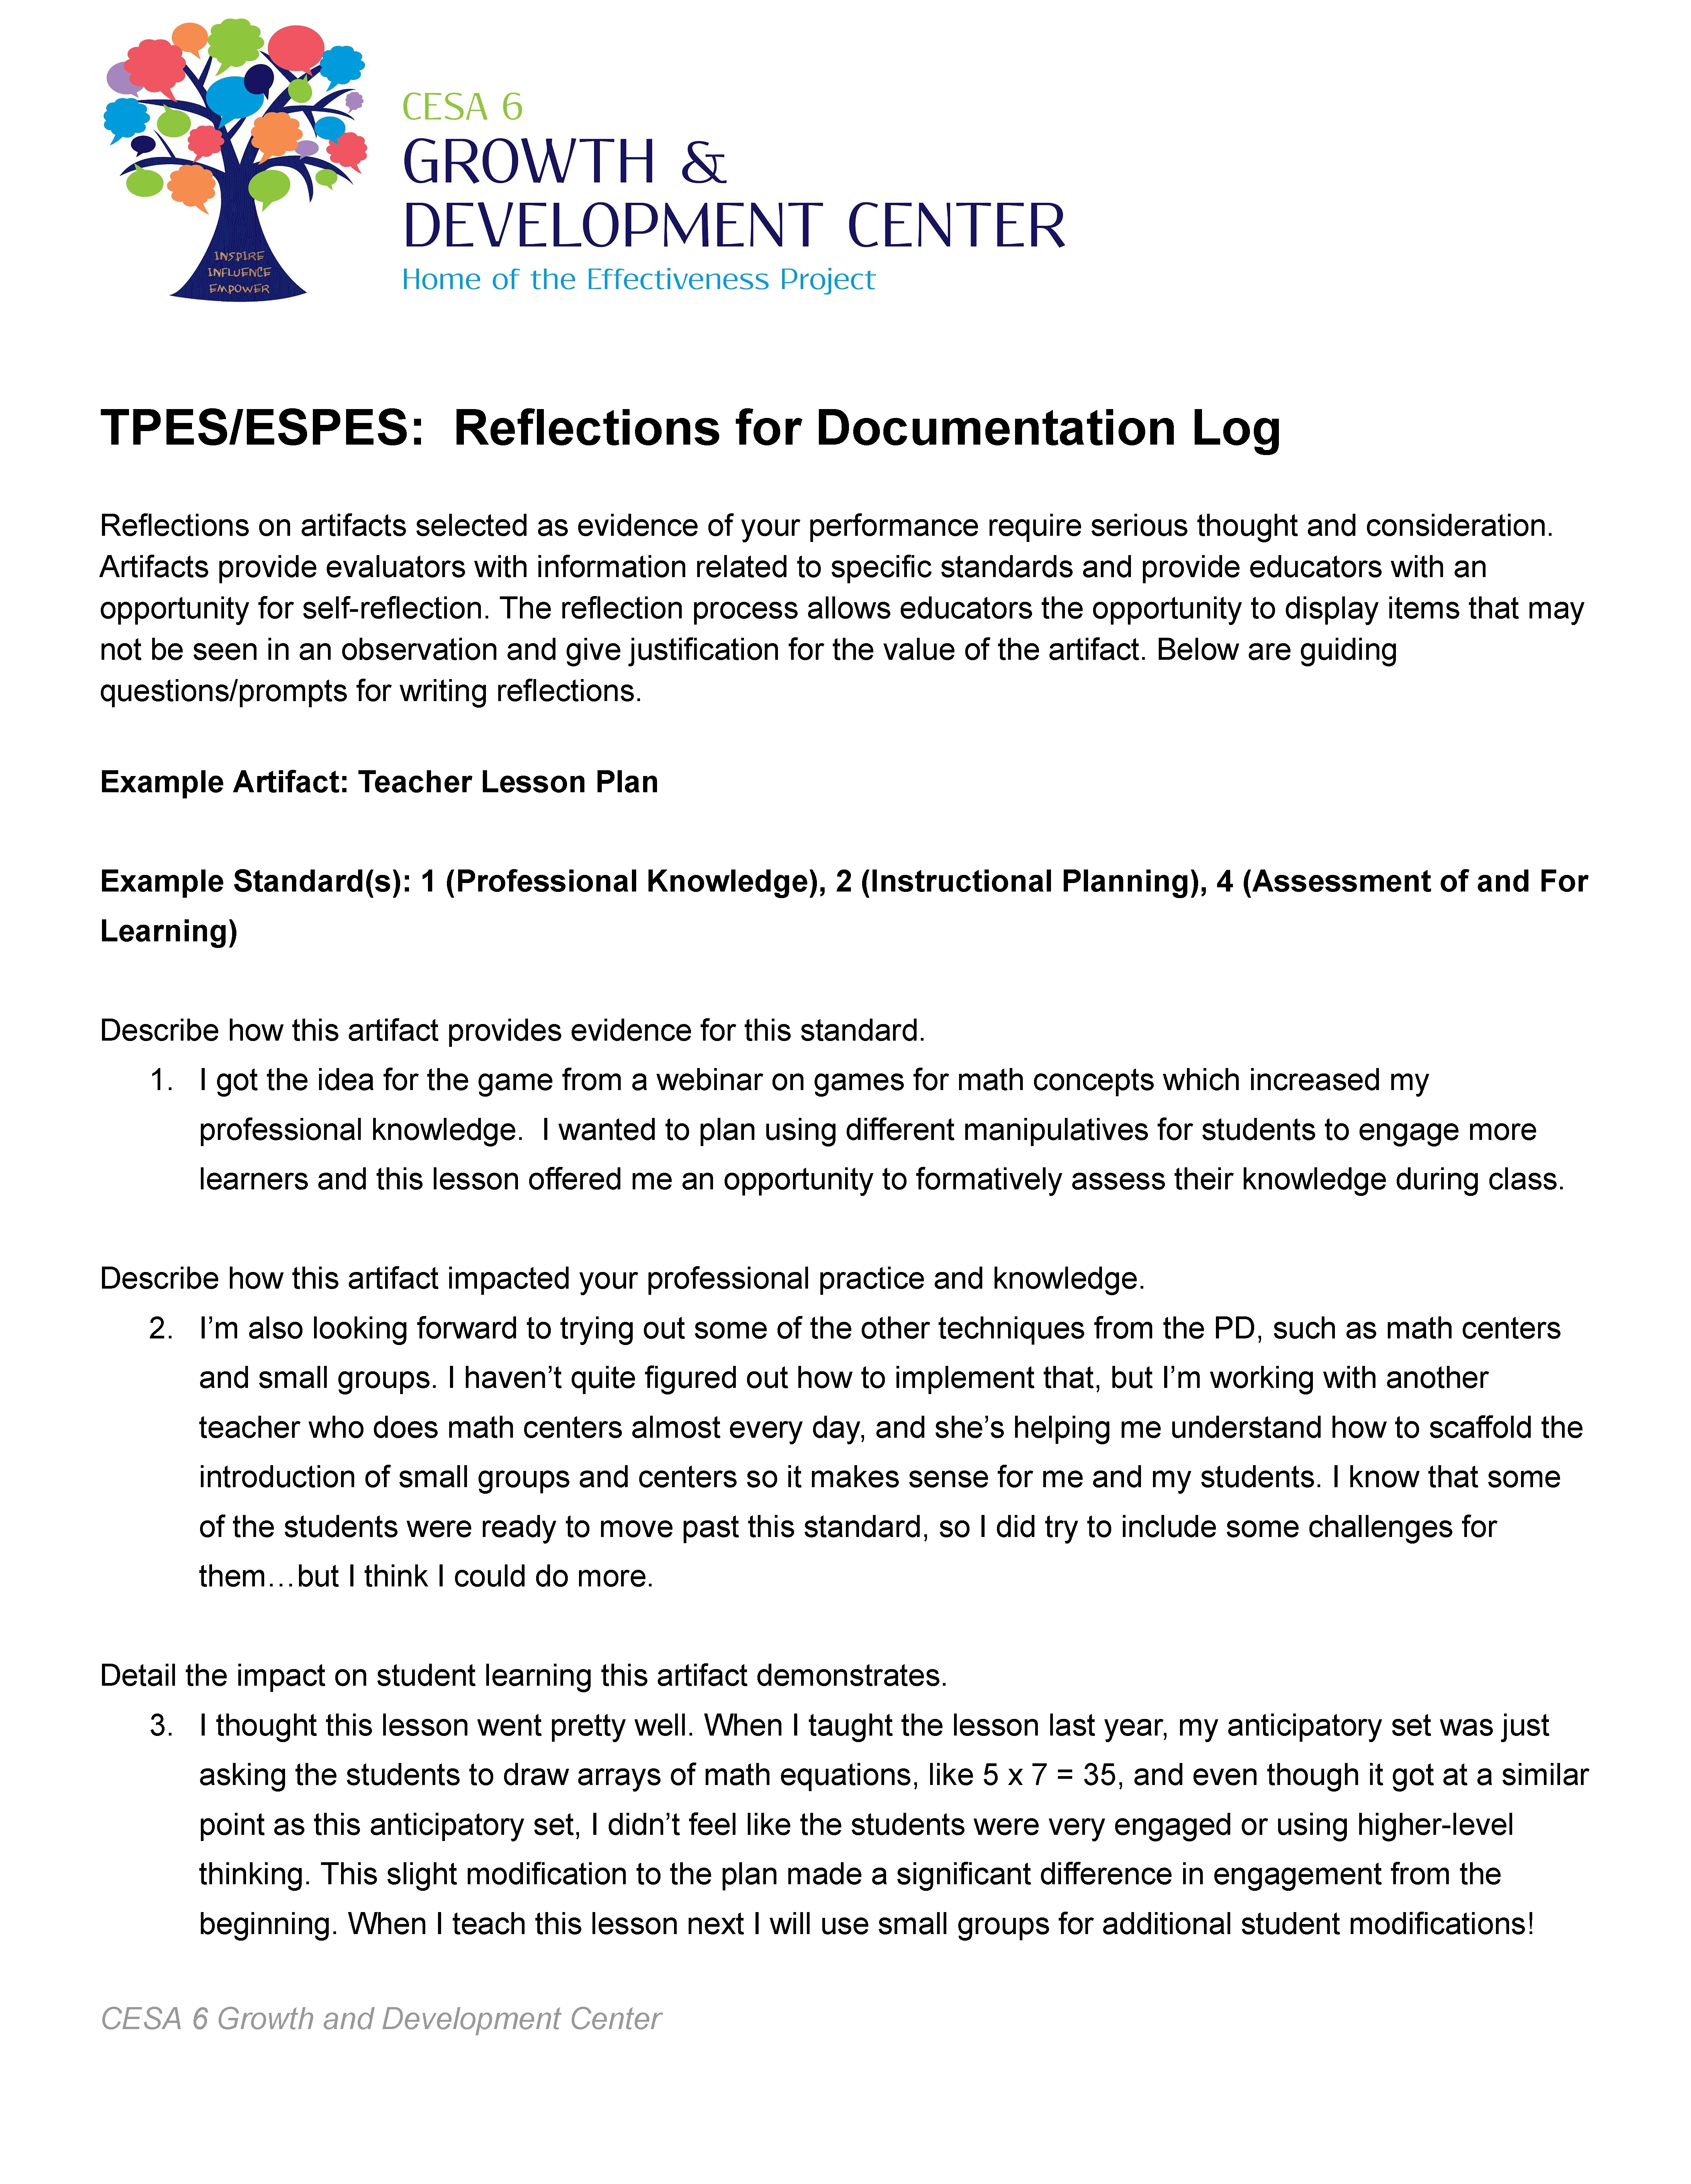 TPES_ESPES_Reflections_for_Documentation_Log_Page_1.png